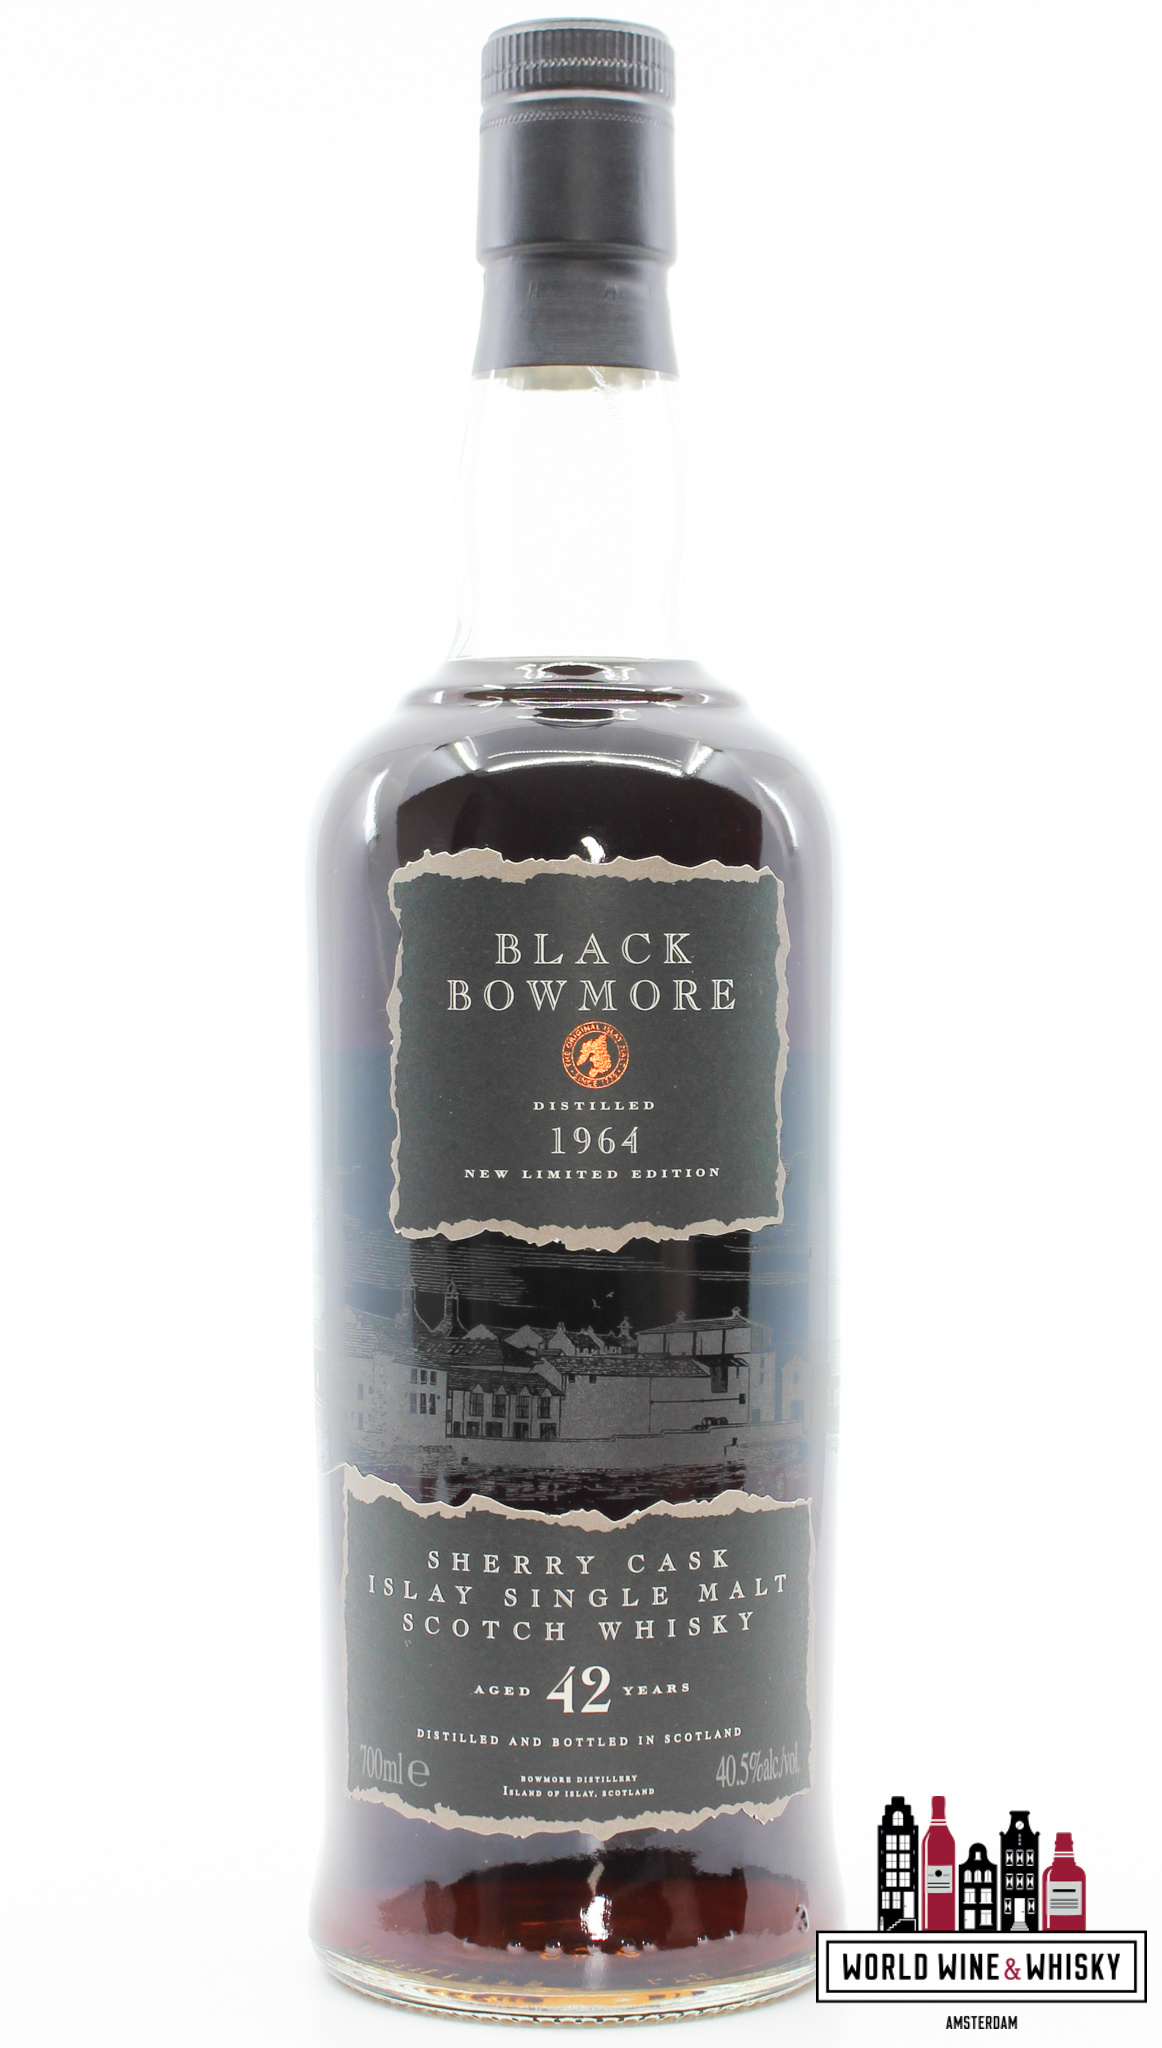 Bowmore Bowmore 42 Years Old 1964 2007 - Black Bowmore - The Trilogy 40.5% (1 of 827)